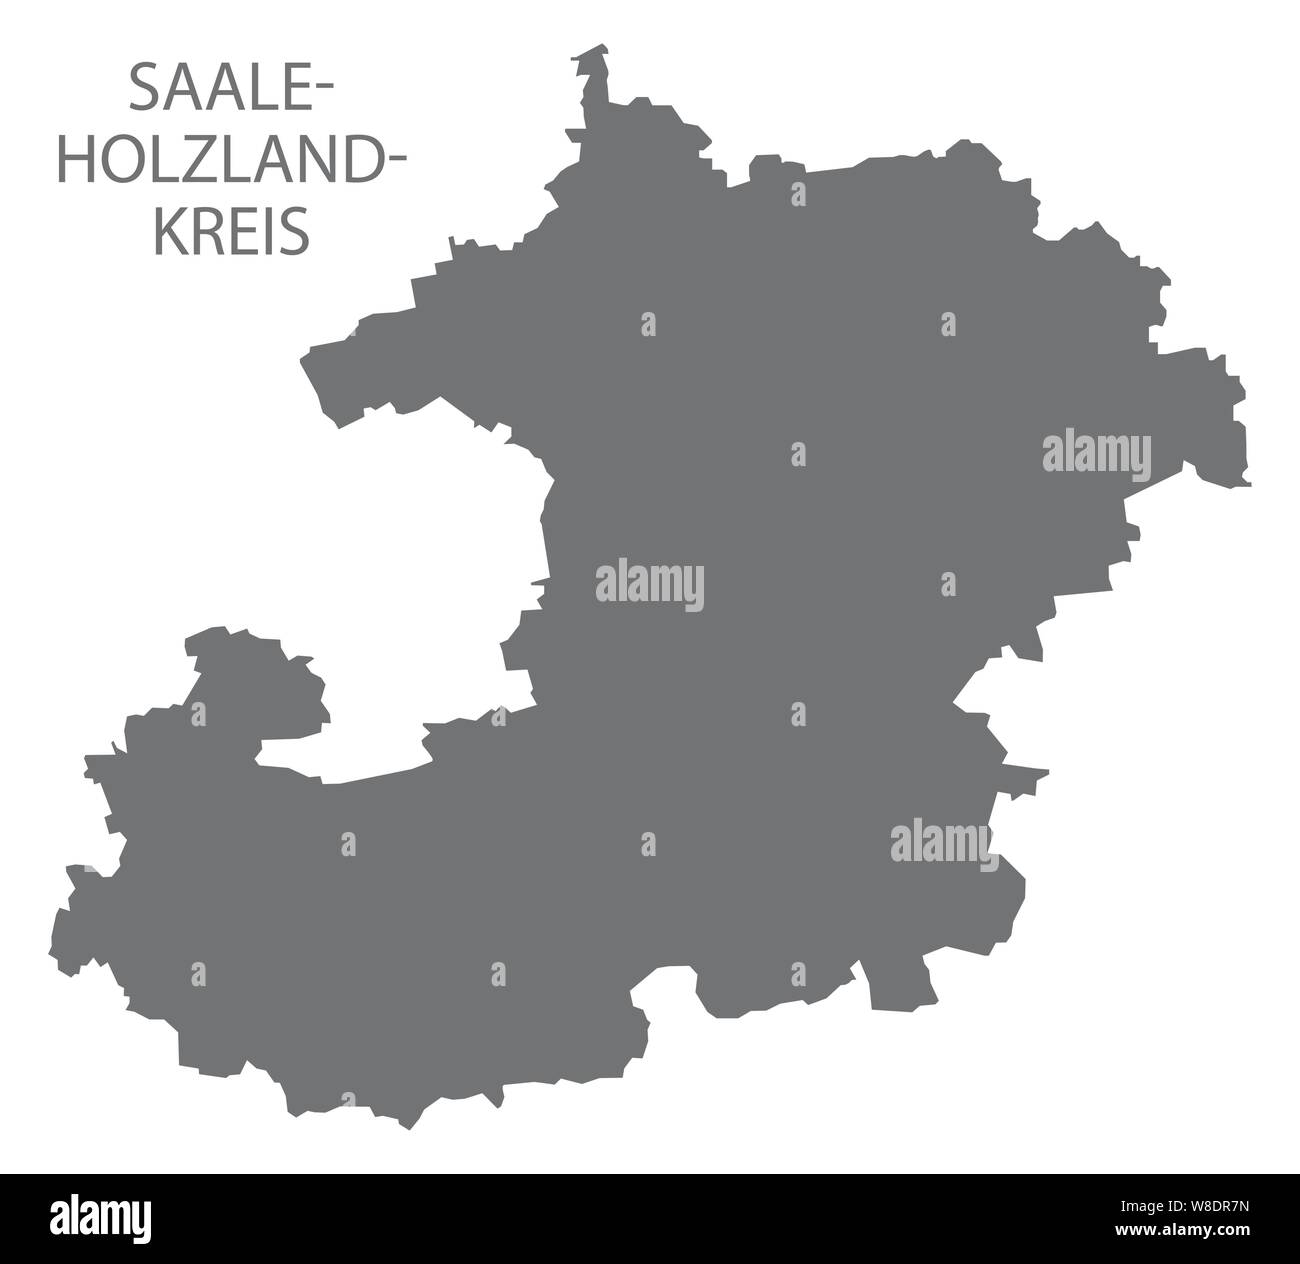 Saale-Holzland-Kreis grey county map of Thuringia Germany Stock Vector